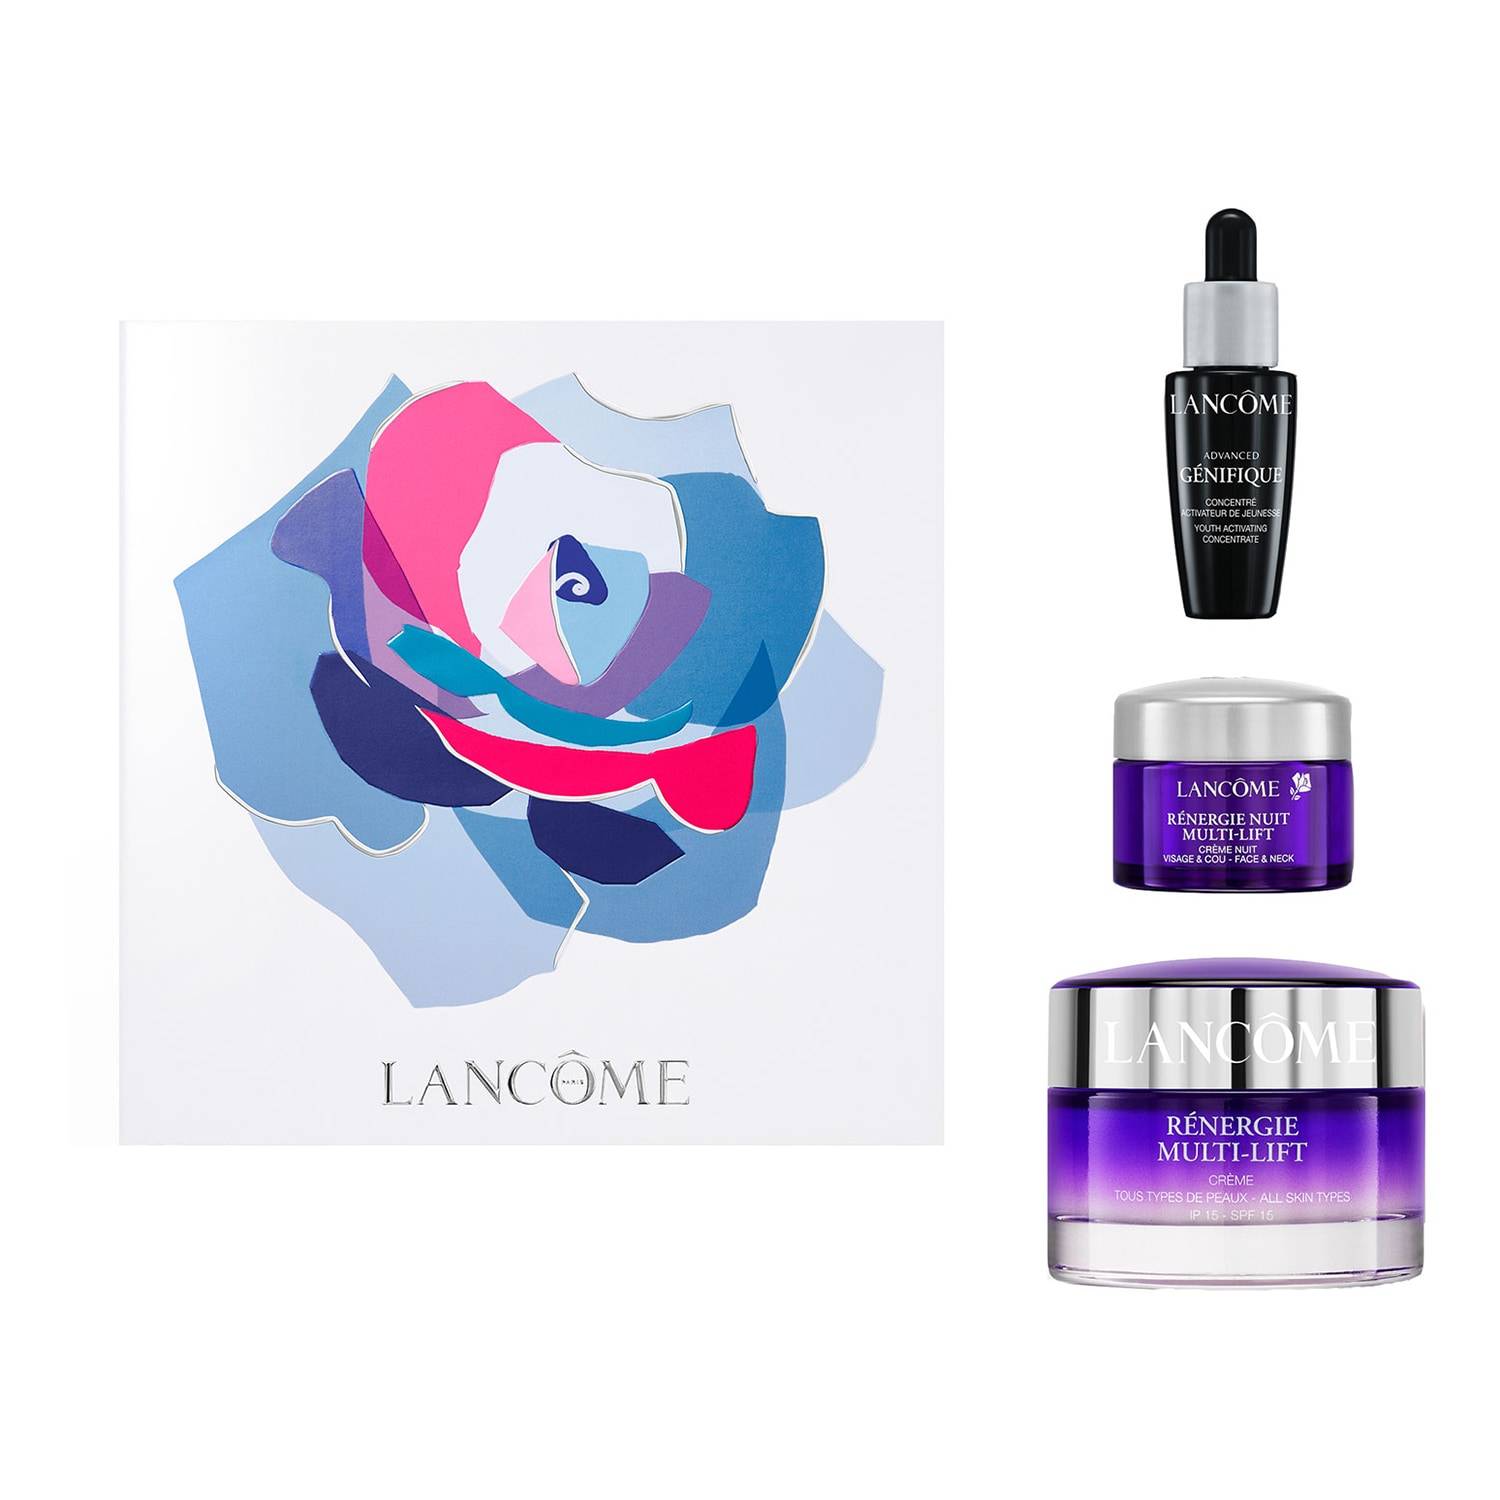 Lancome Renergie Multi Lift Skincare Mother's Day Gift Set